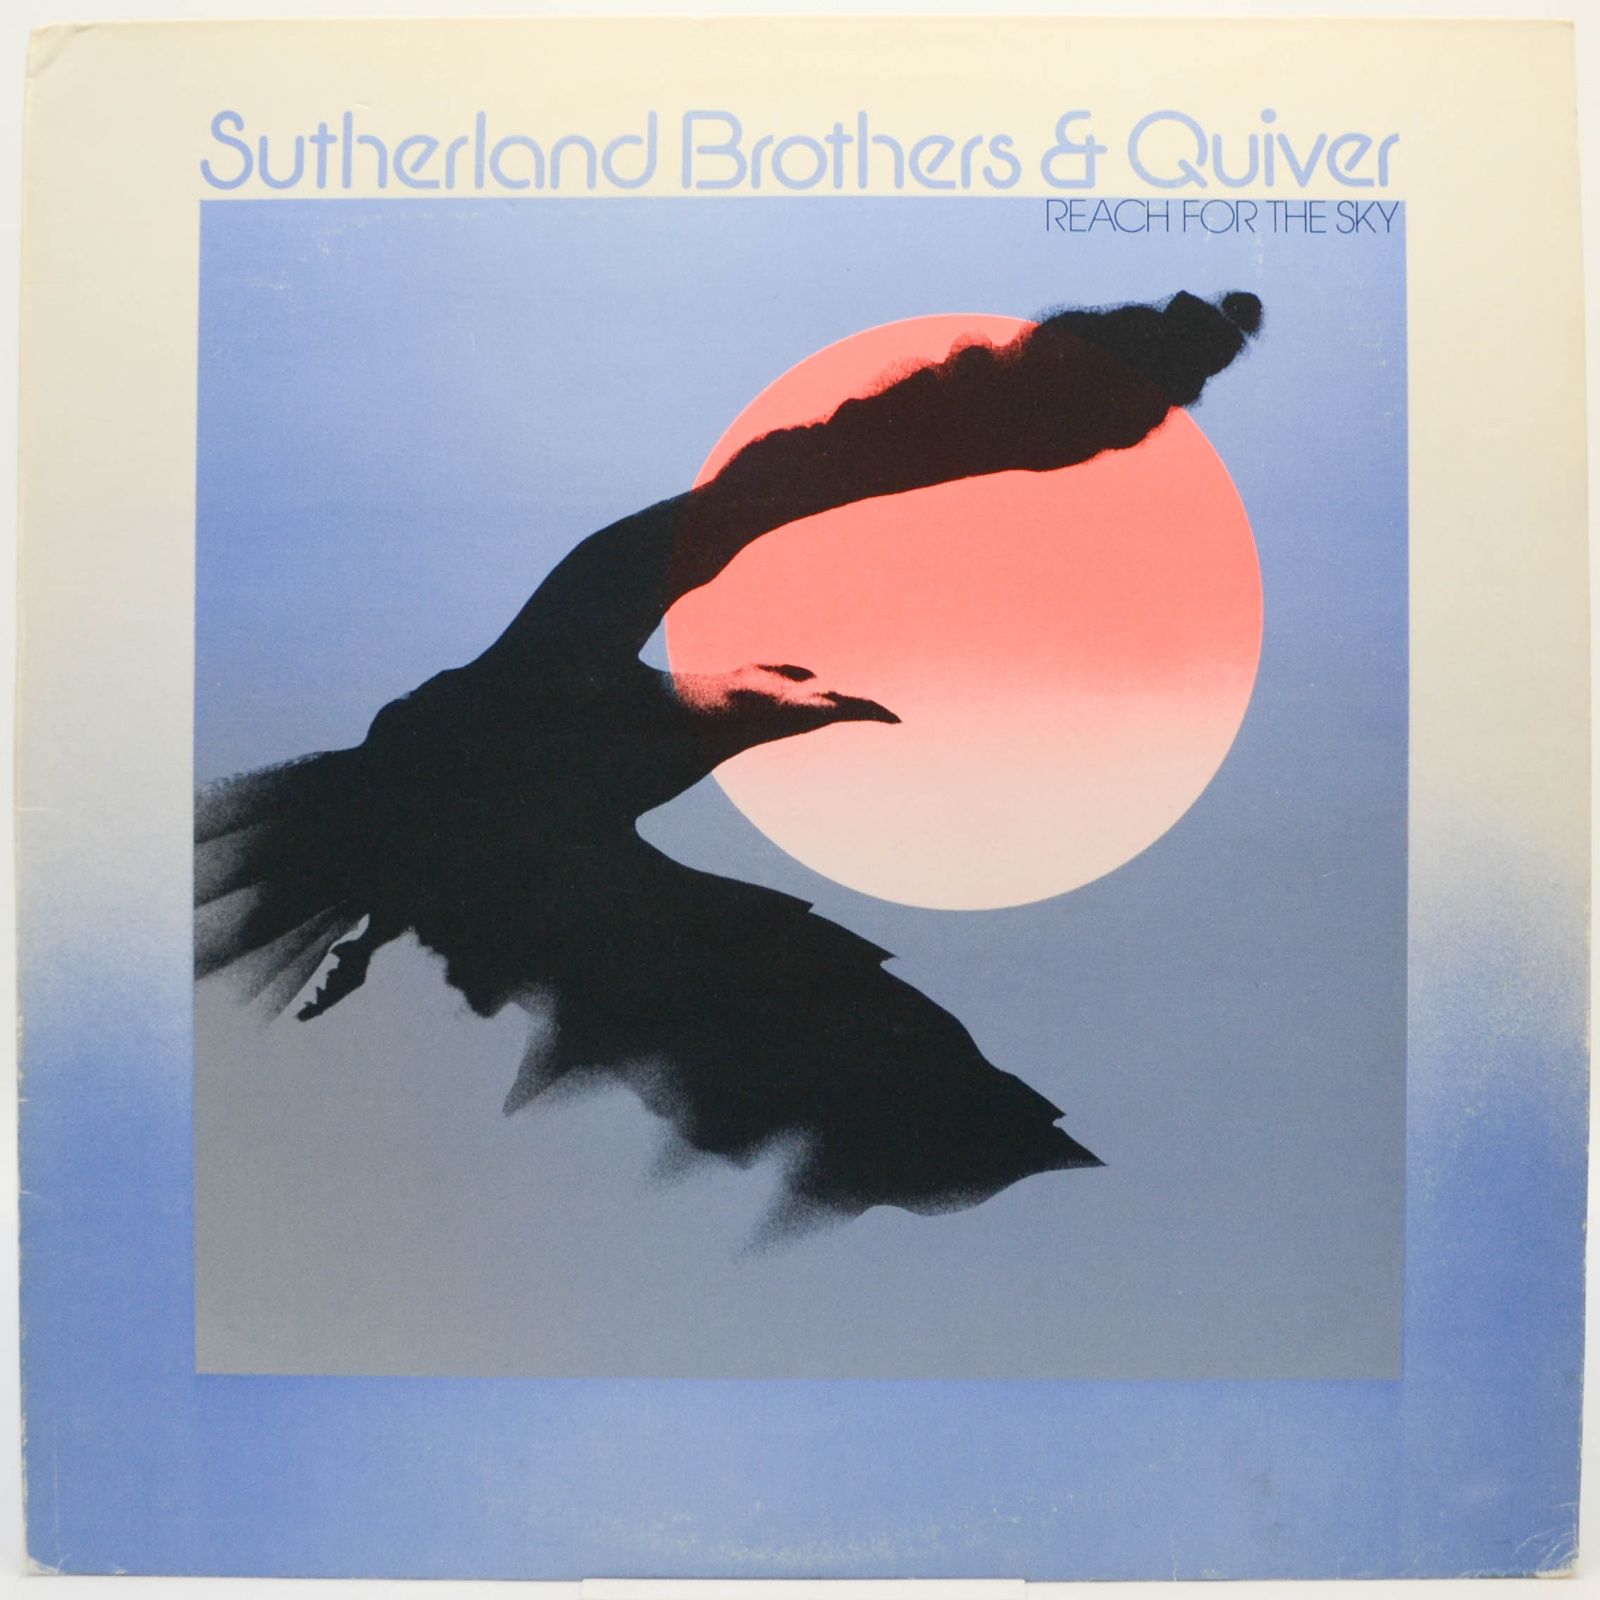 Sutherland Brothers & Quiver — Reach For The Sky, 1975